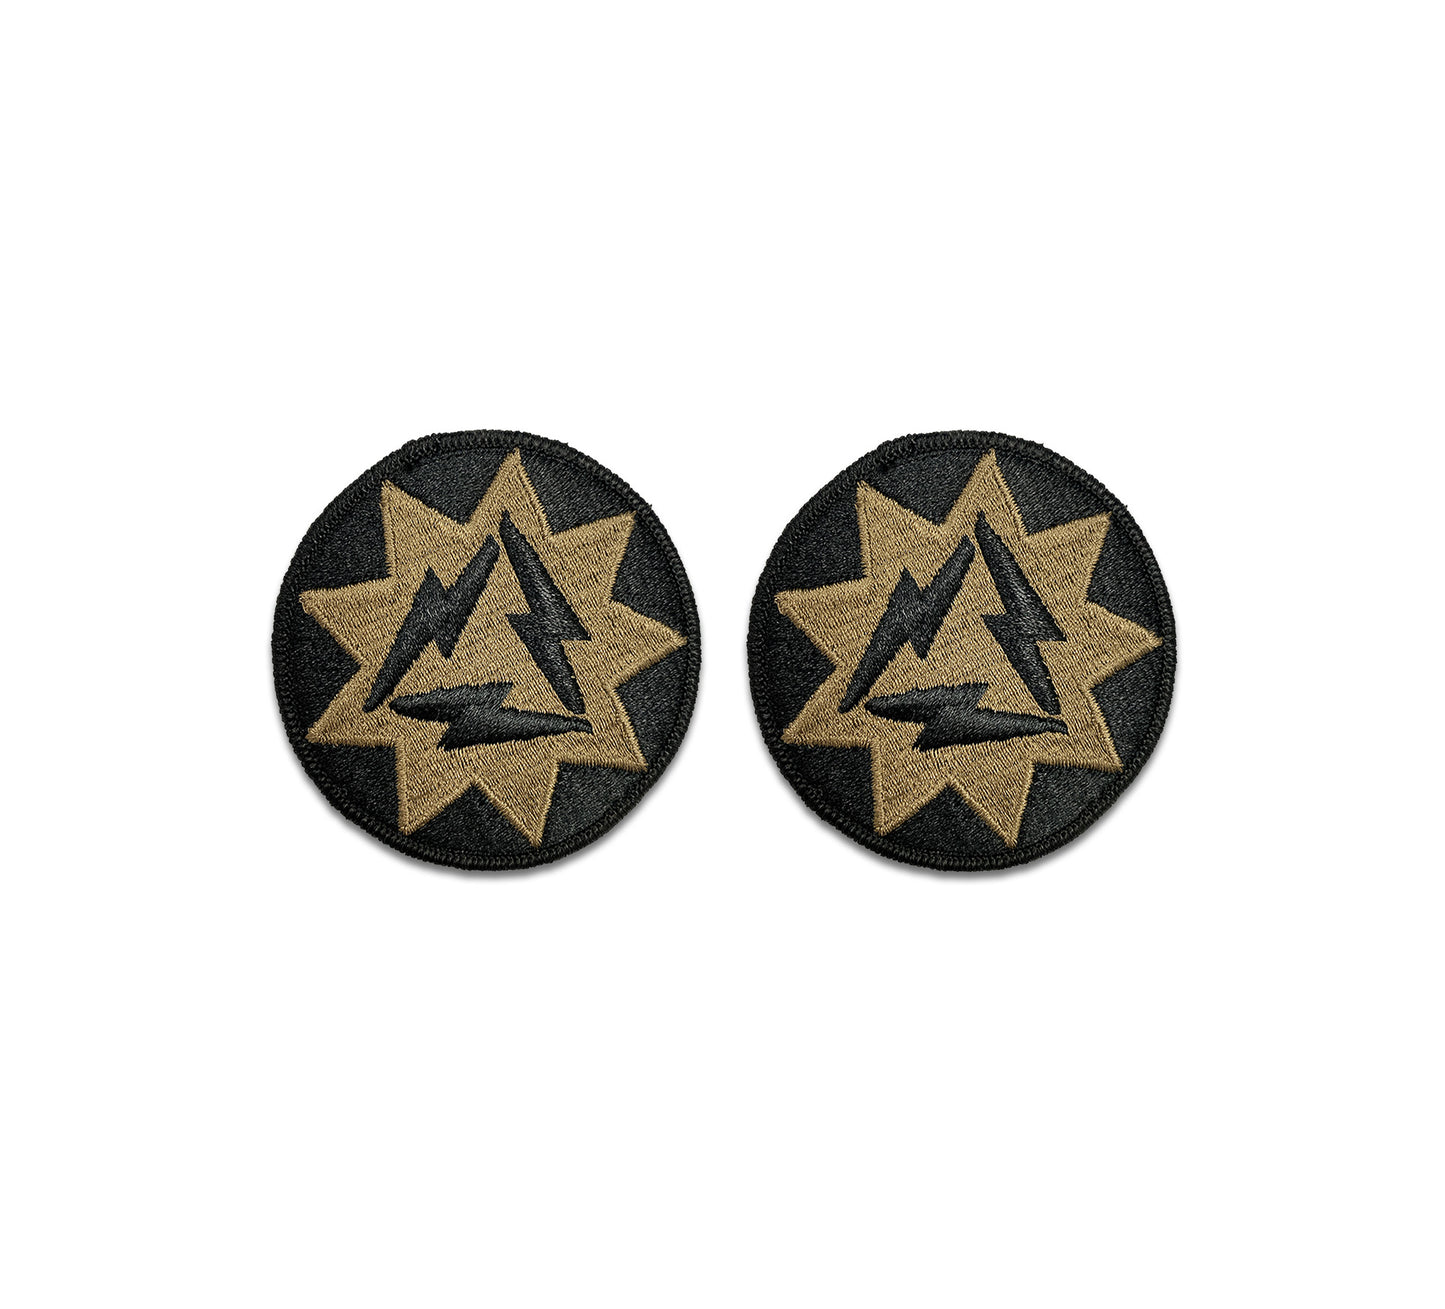 US Army 93rd Signal Brigade OCP Patch with Hook Fastener (pair)